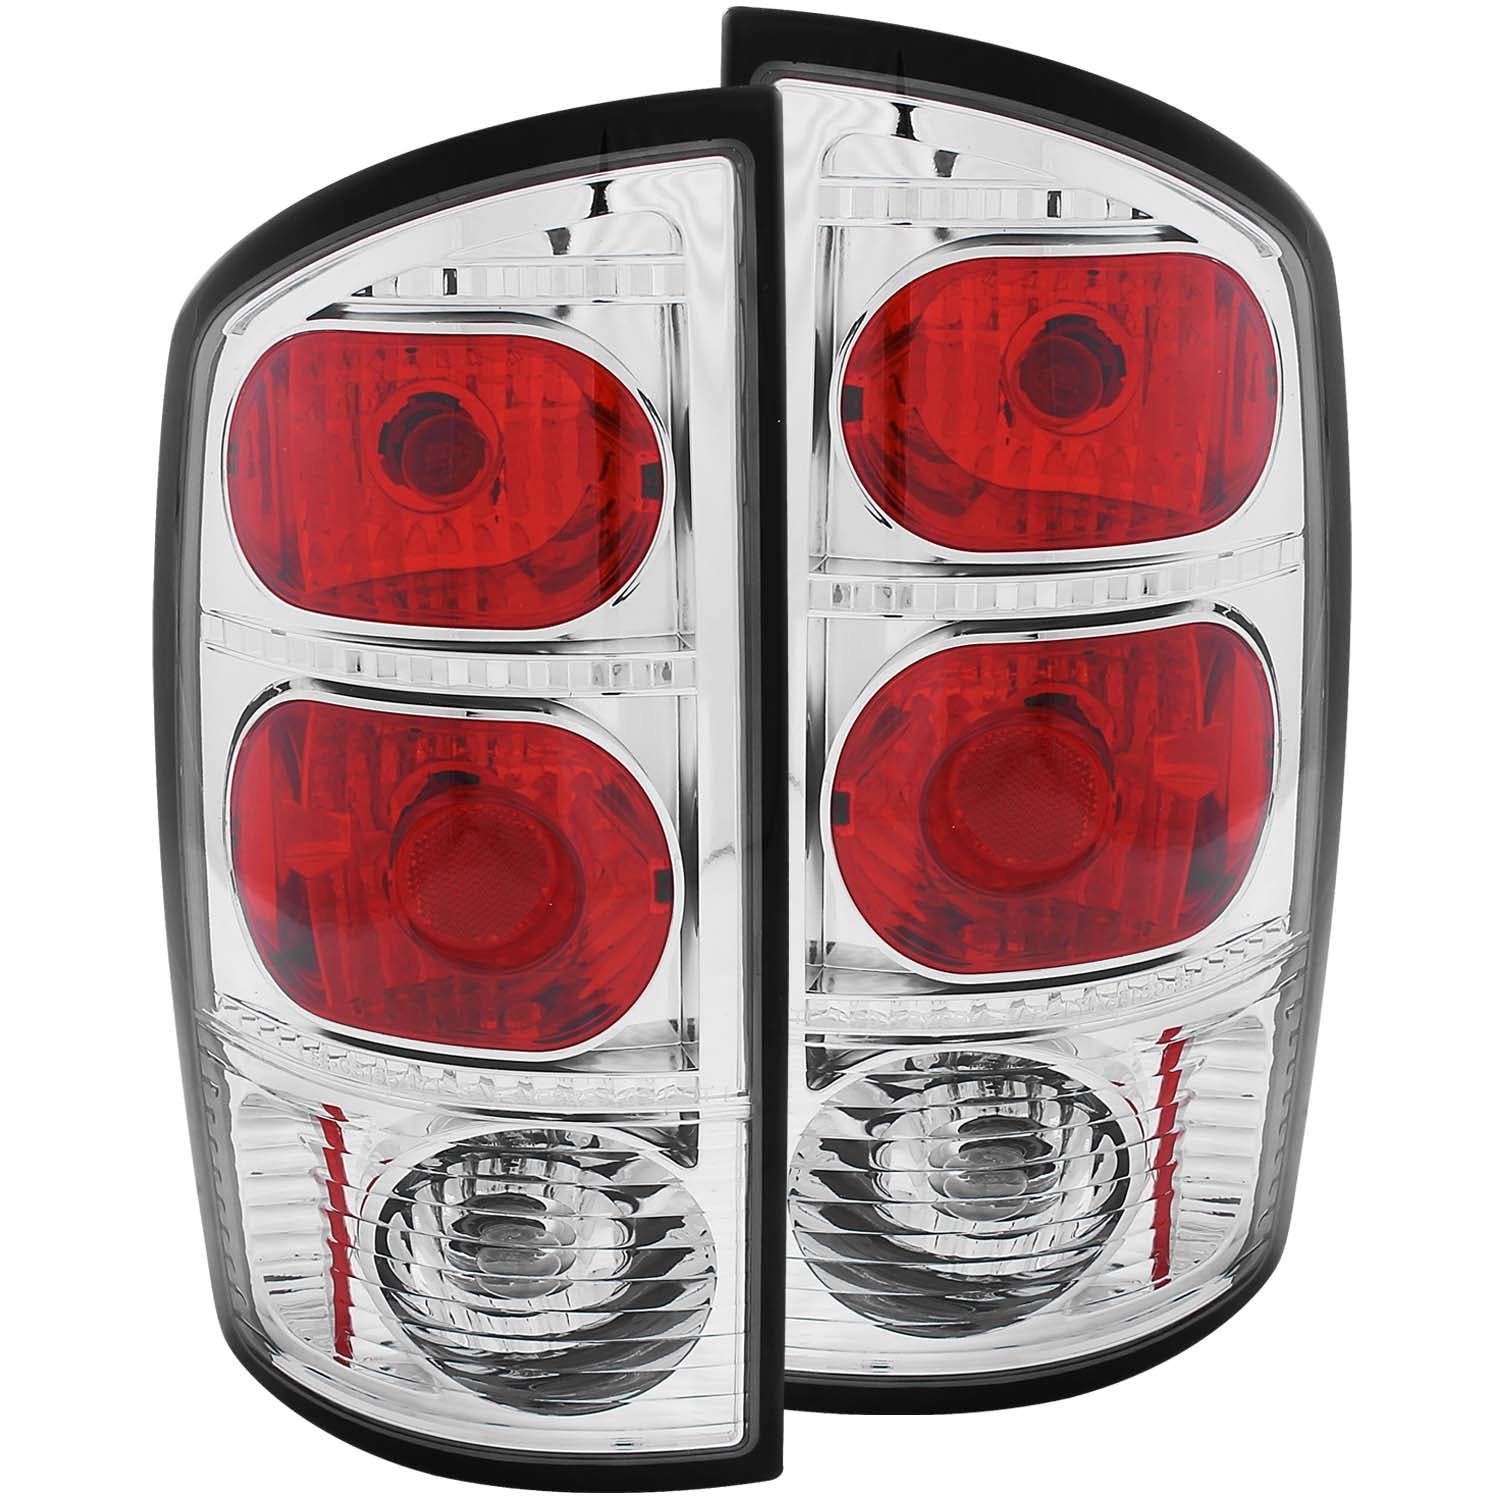 AnzoUSA 211043 Taillights Chrome